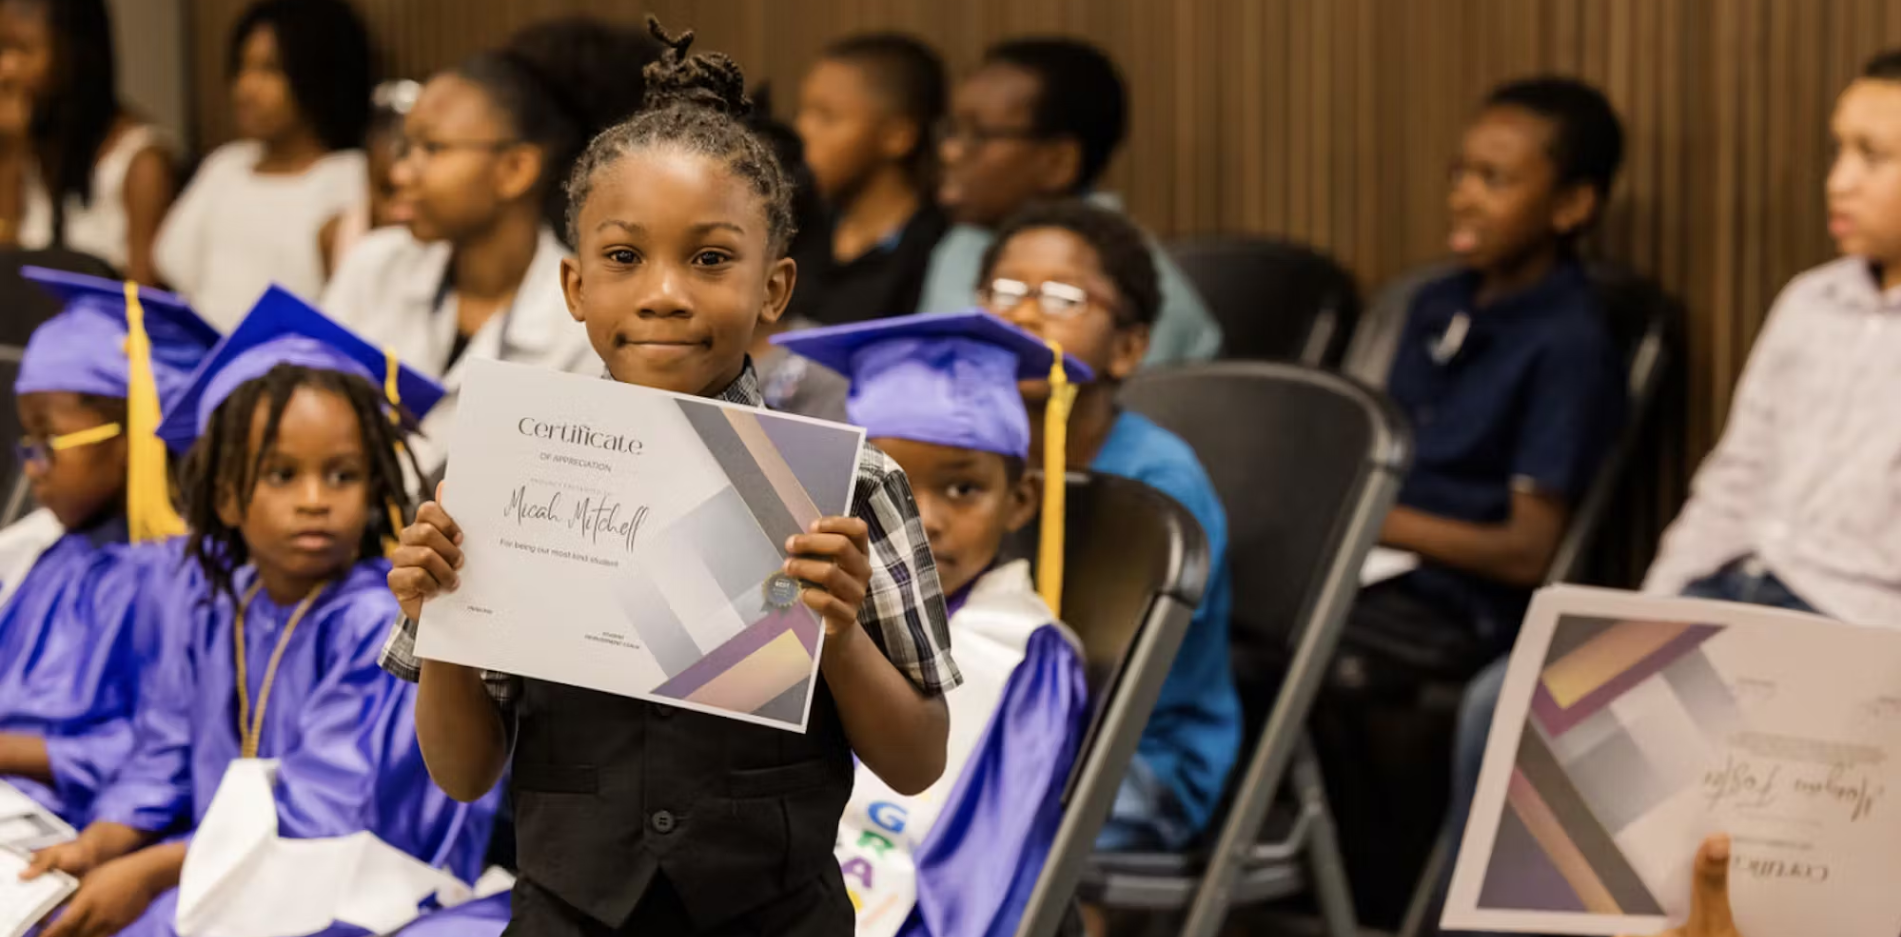 Black Families Turn to Microschools and Homeschool for ‘Safety’ in Education